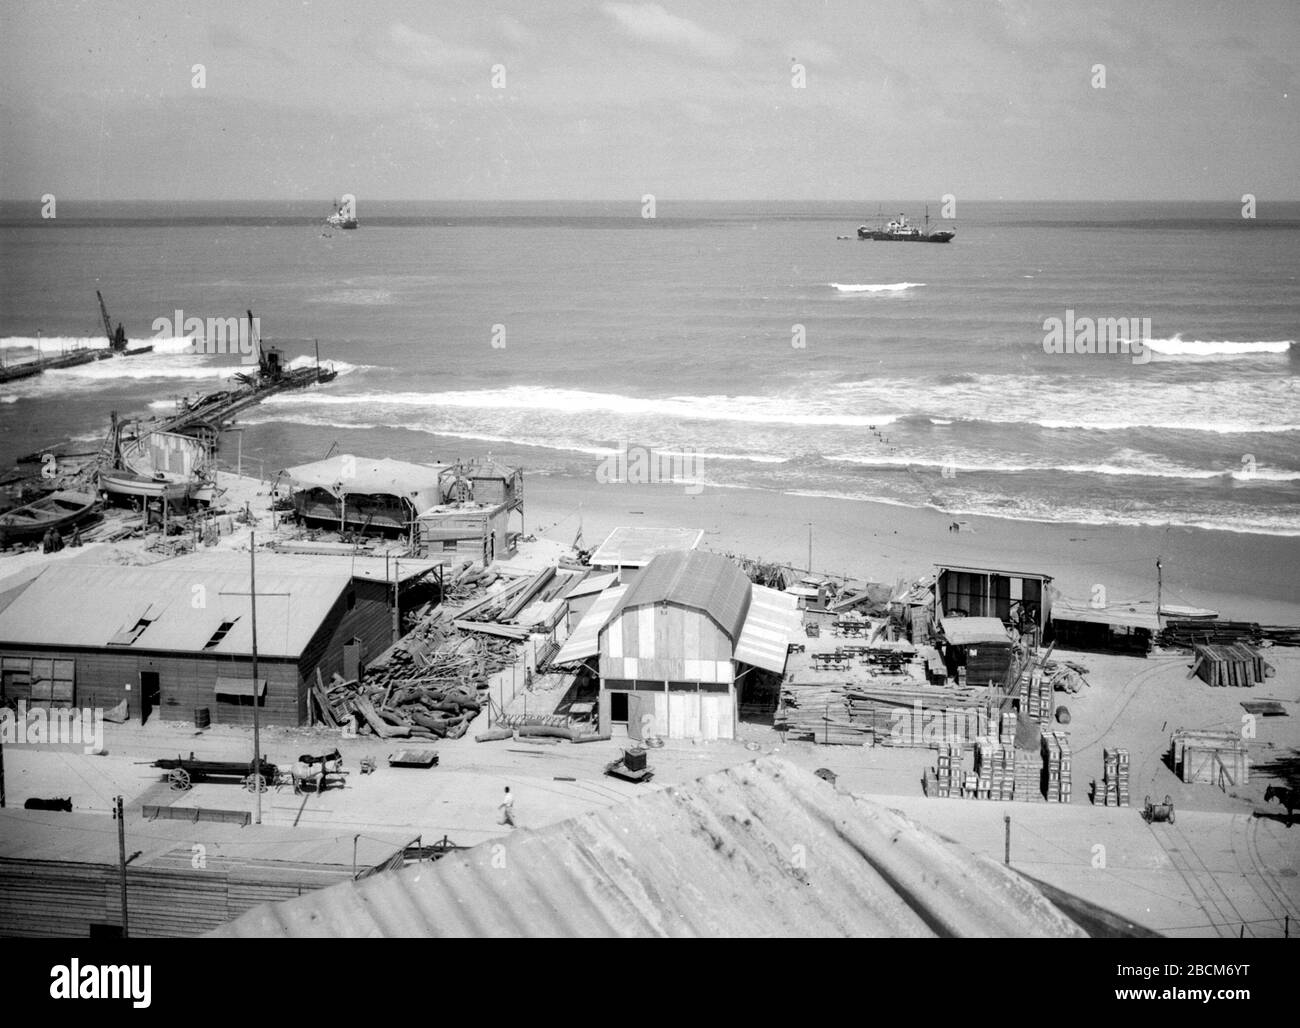 English The 2nd Of 2 Panoramic Photos Of The Tel Aviv Port U E I I U O C U U U U E E O E 17 July 1937 This Is Available From National Photo Collection Of Israel Photography Dept